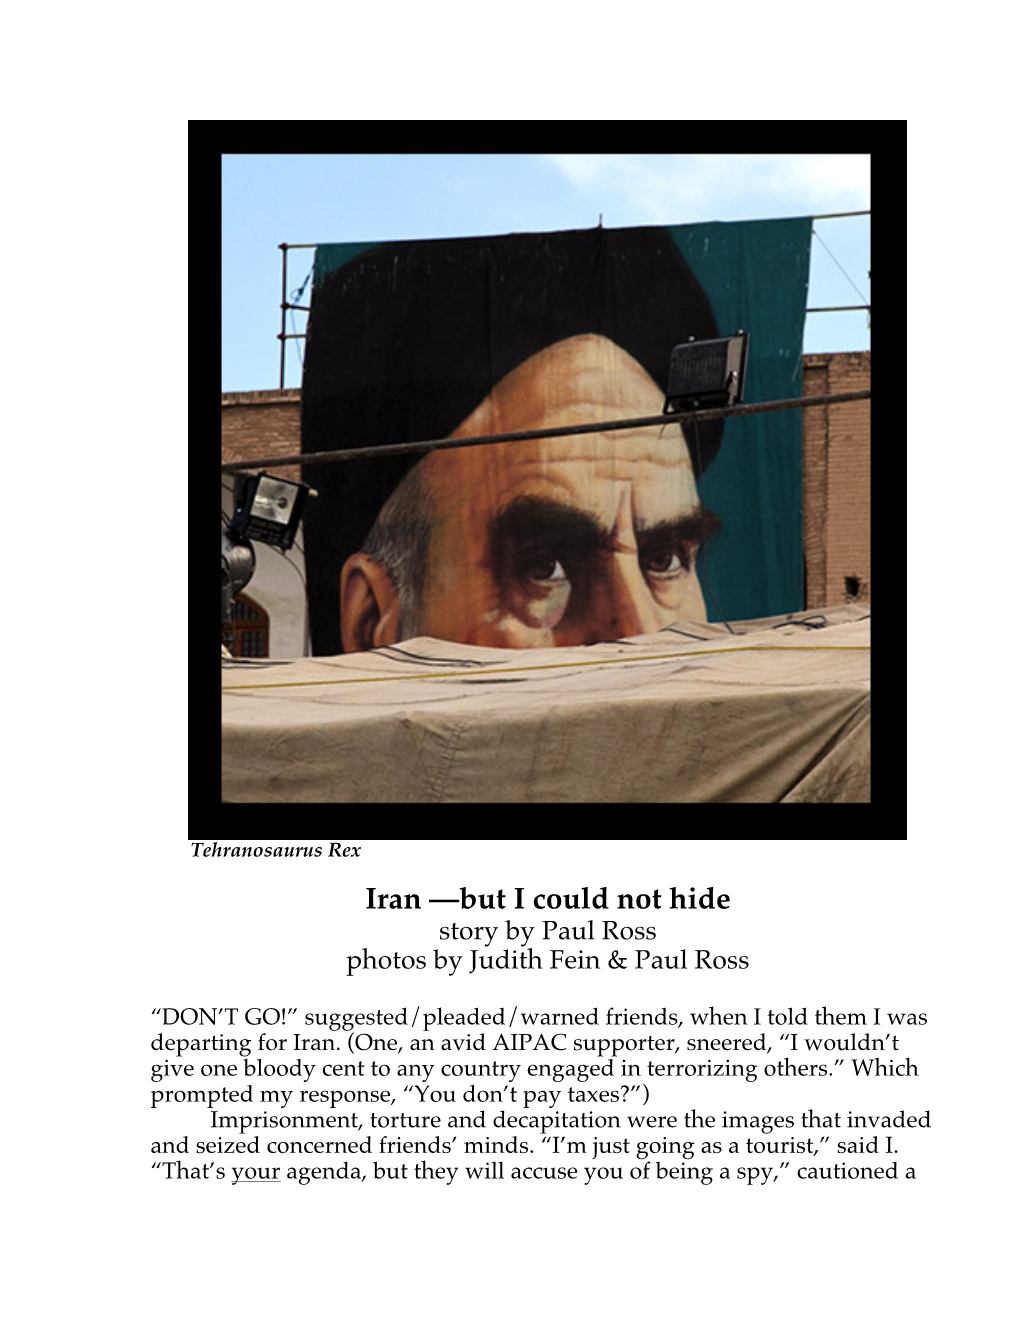 Iran ––But I Could Not Hide Story by Paul Ross Photos by Judith Fein & Paul Ross